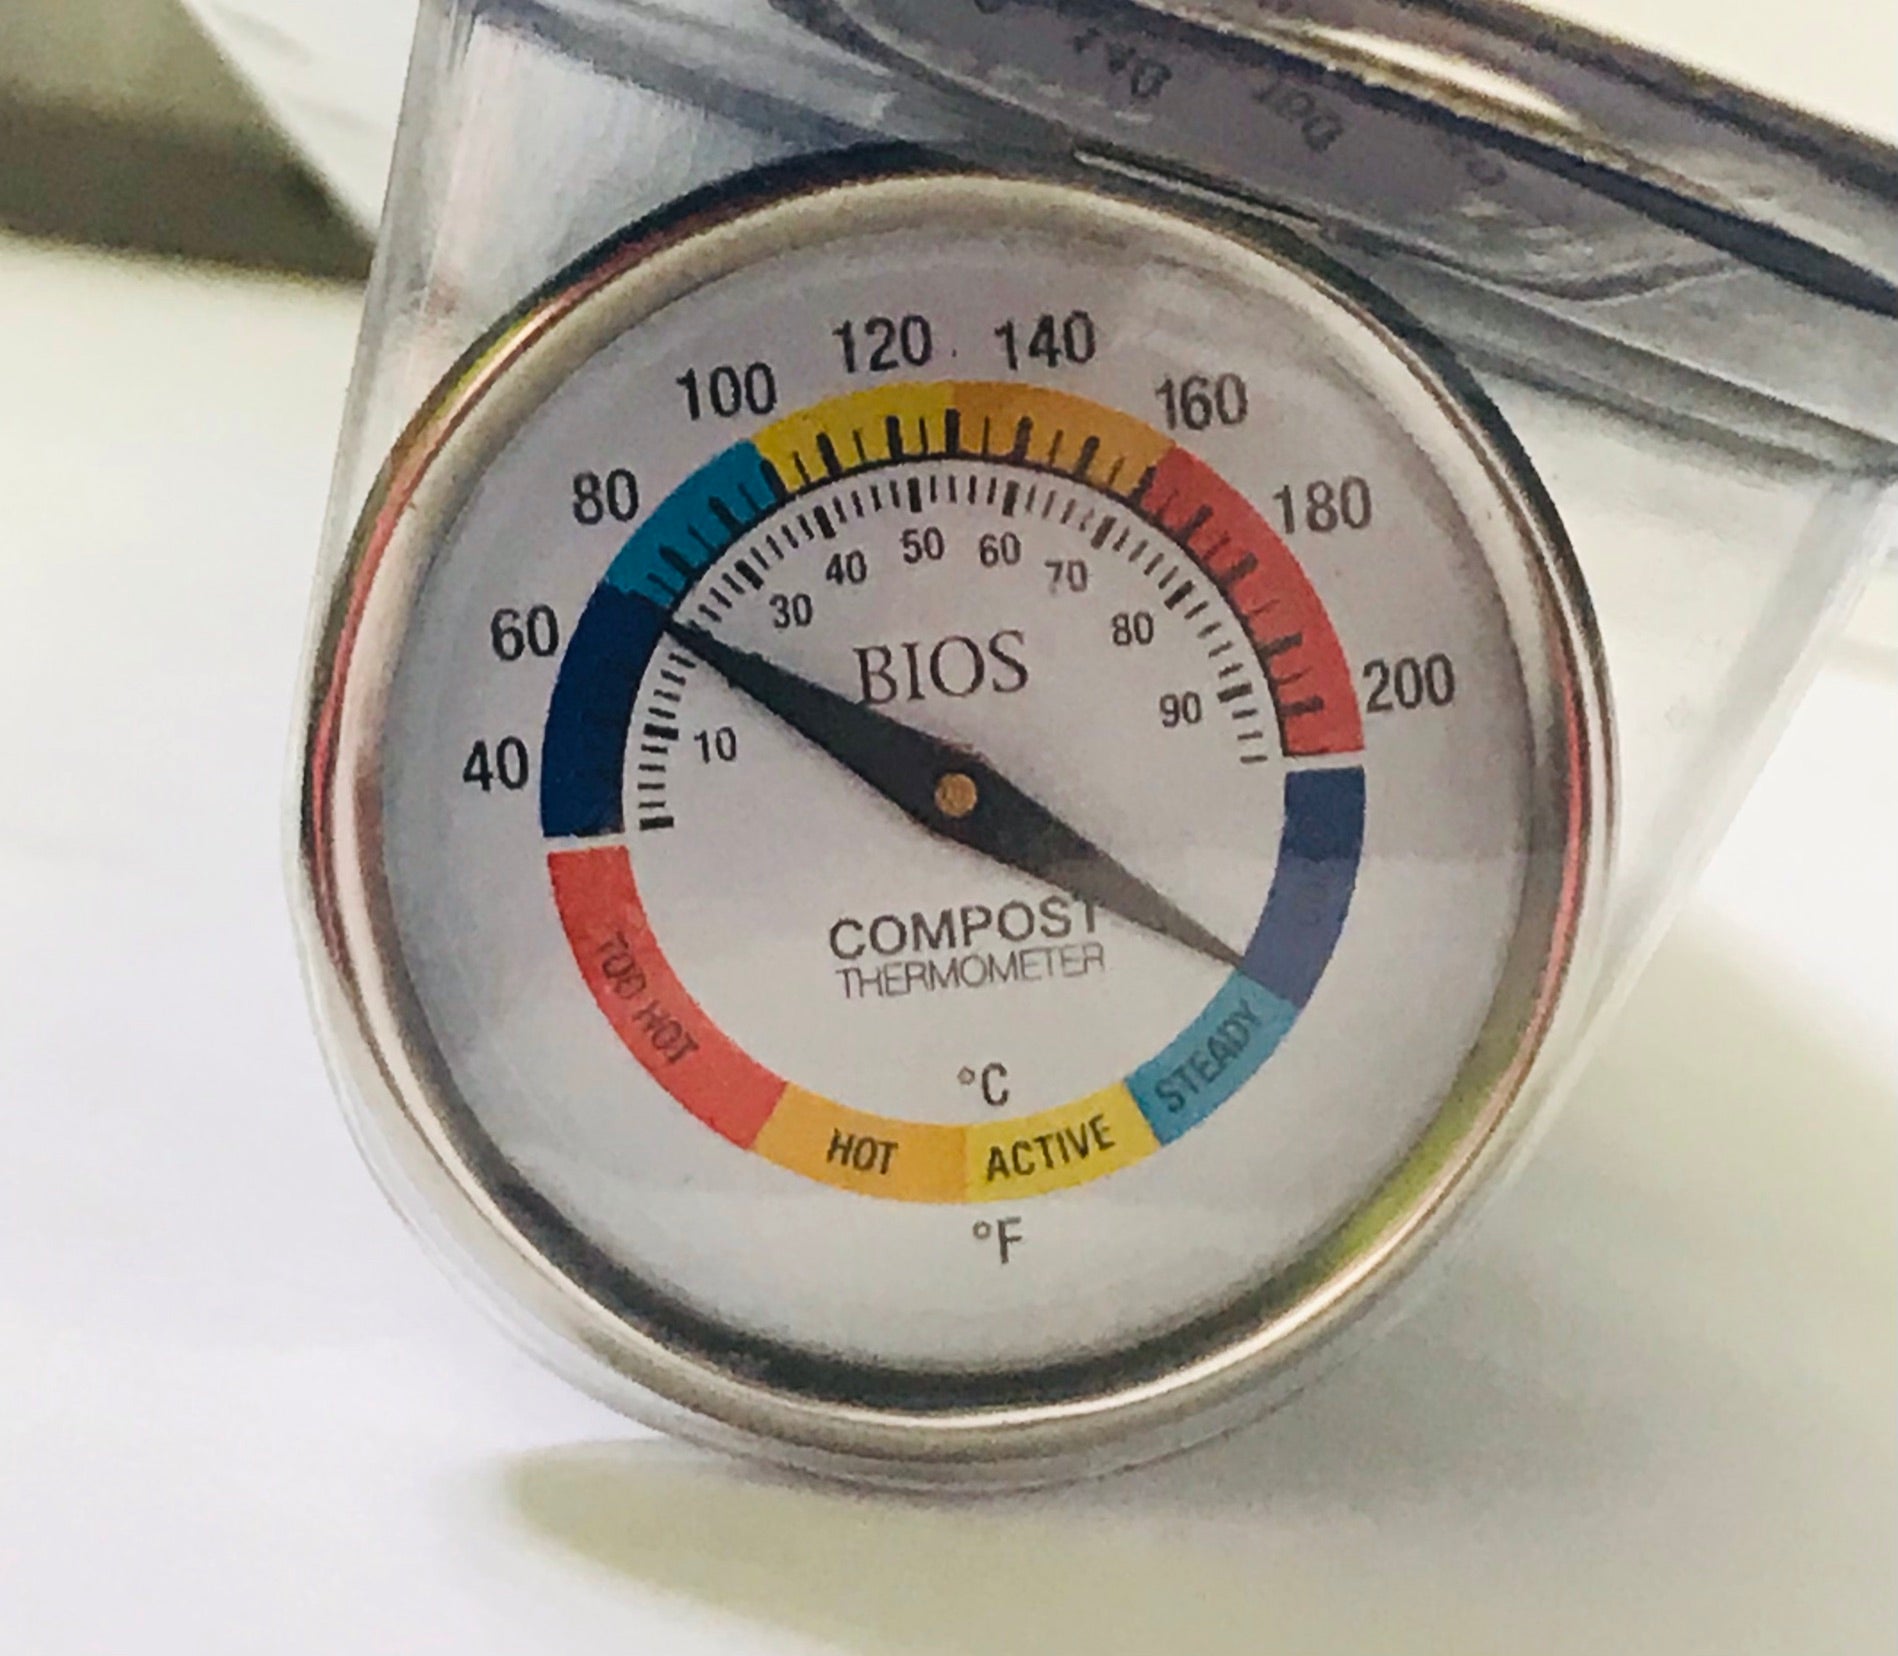 Bios Compost Thermometer